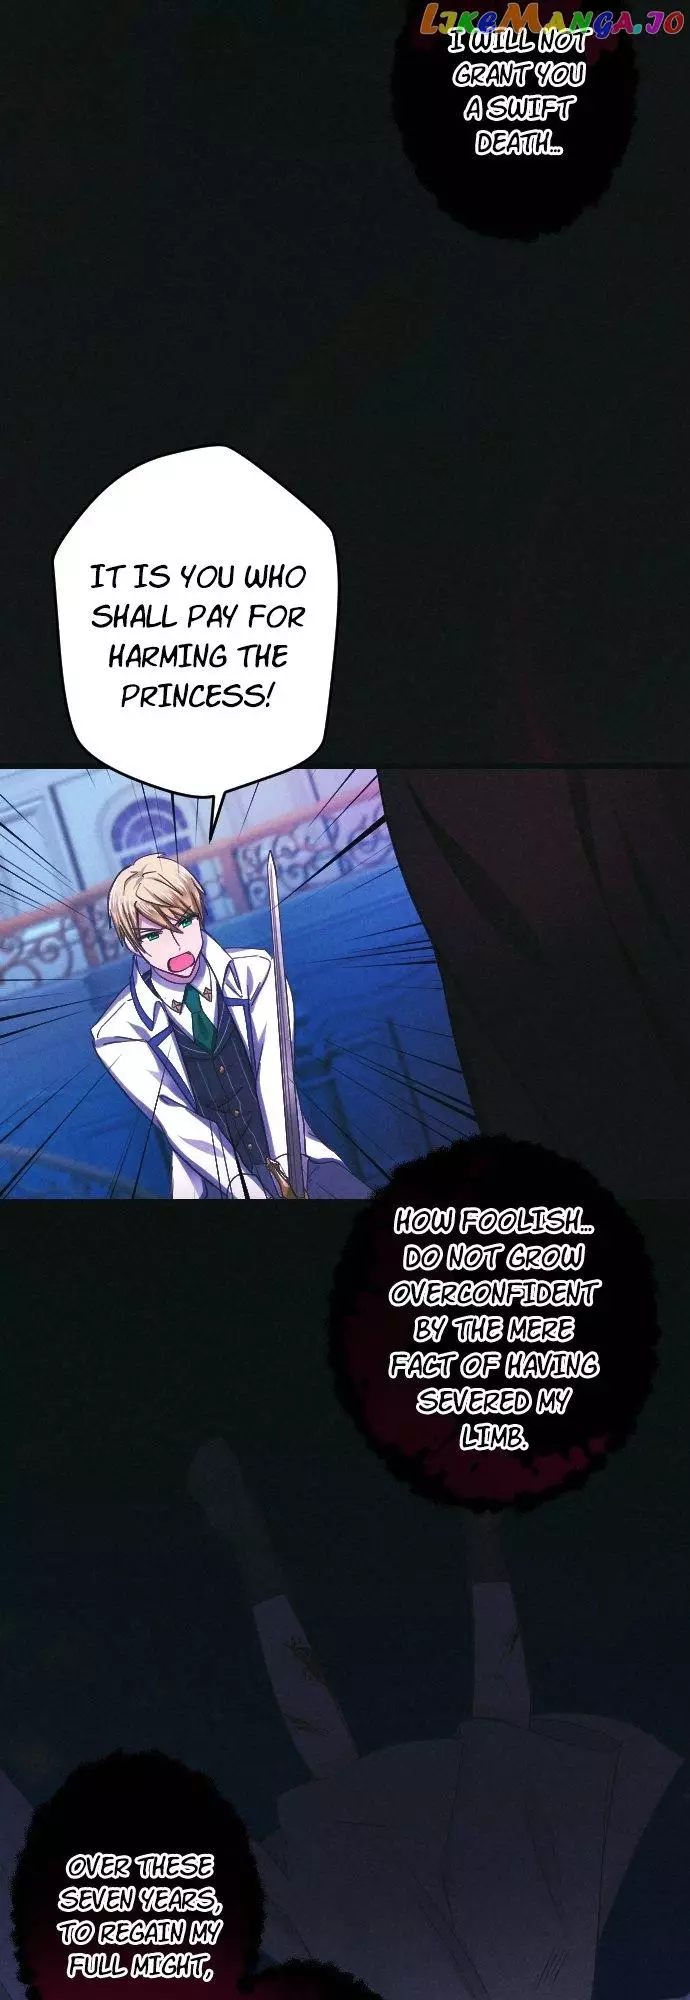 It's Not Easy Being The Ice Emperor's Daughter - 26 page 8-0552b411